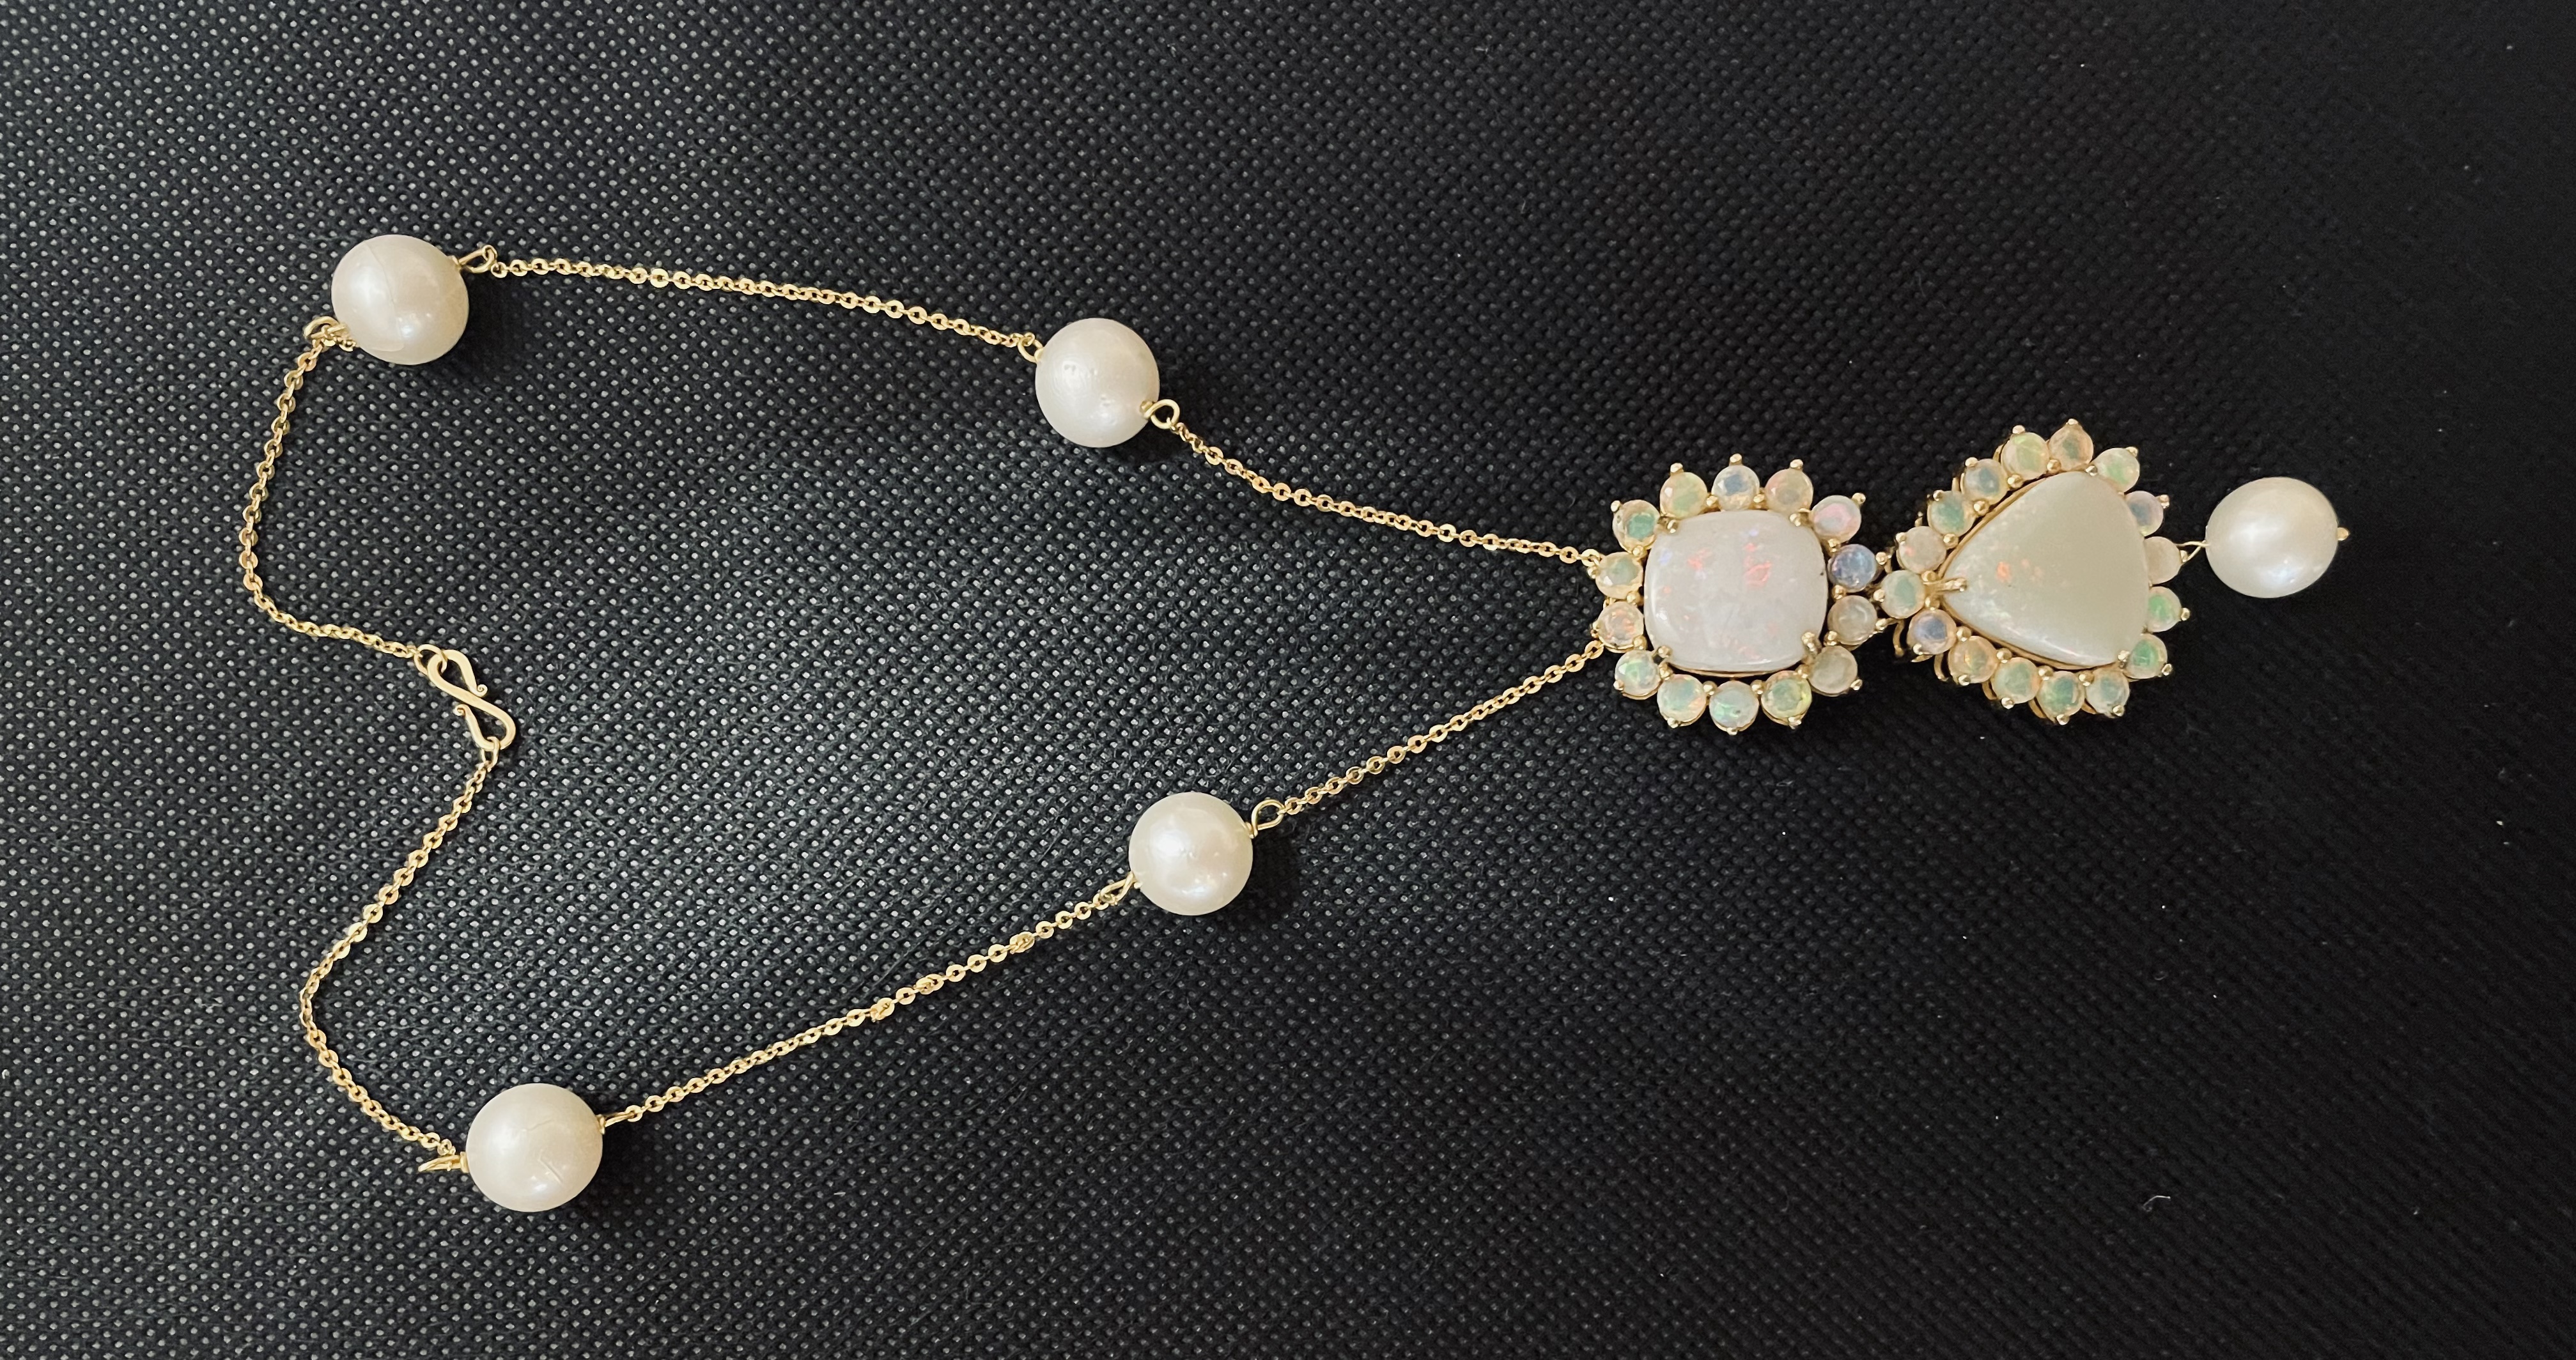 Beautiful 25ct Australian opal Necklace w 52ct South sea Pearls and 18k gold - Image 5 of 6